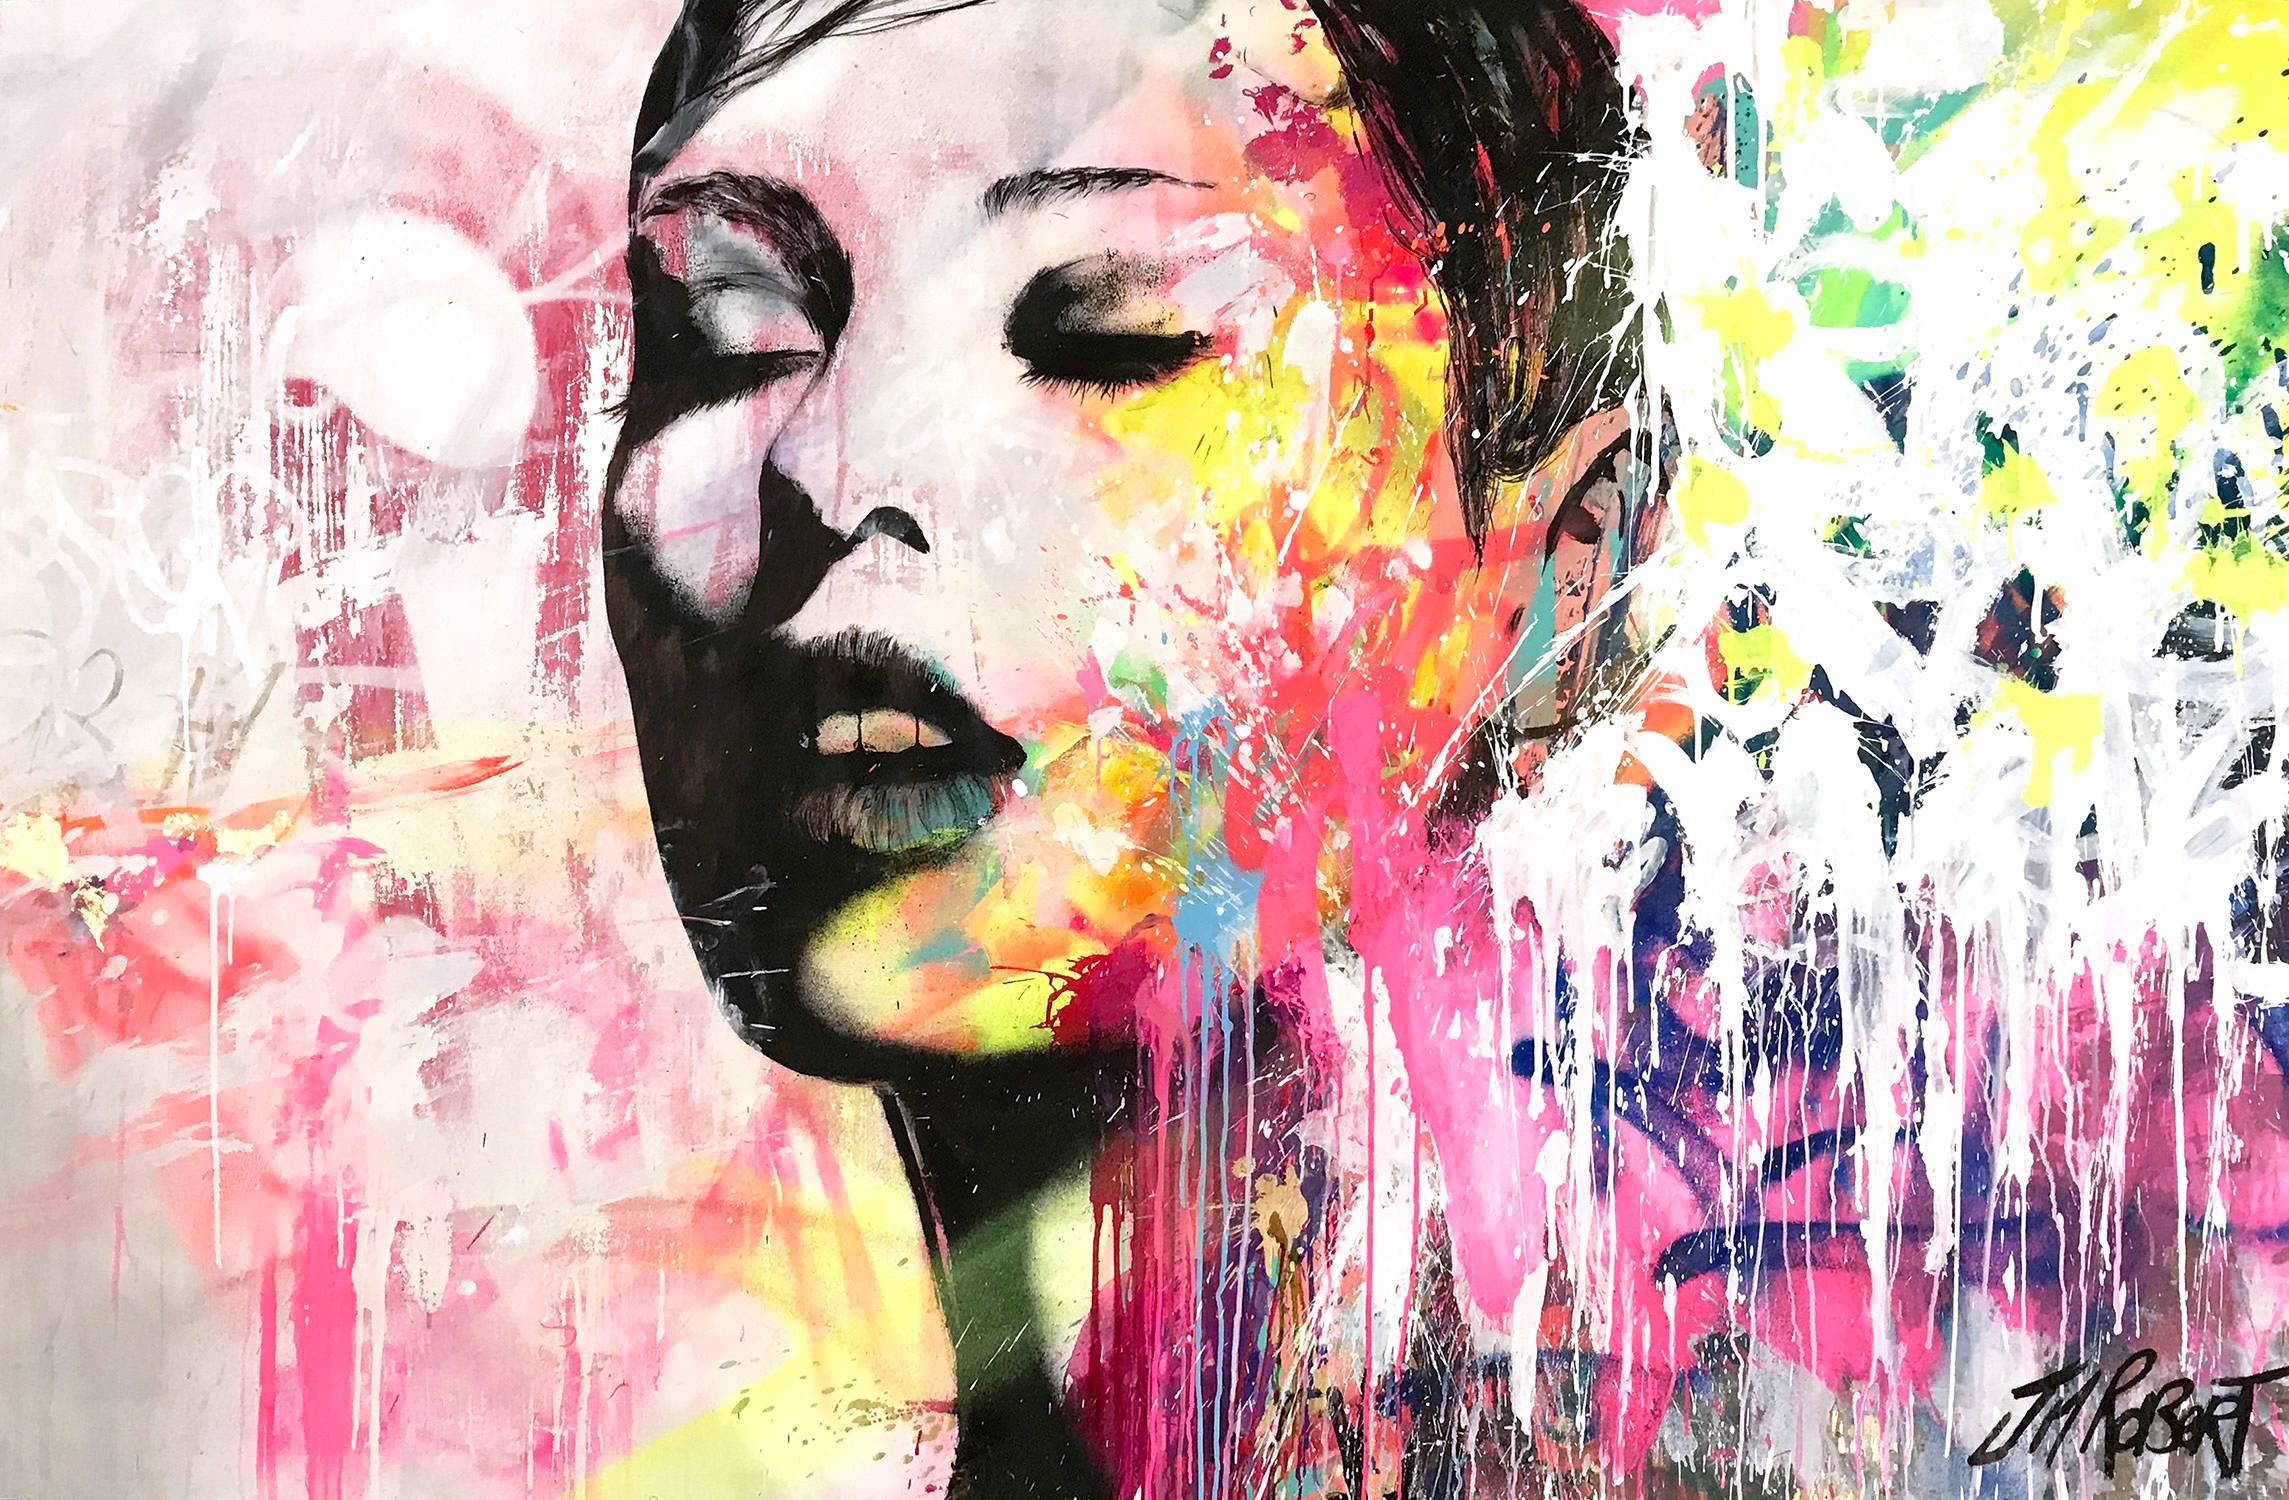 “Les Yeux Fermes, Souvent” Eyes Closed Often, Colorful, Abstract Street Art